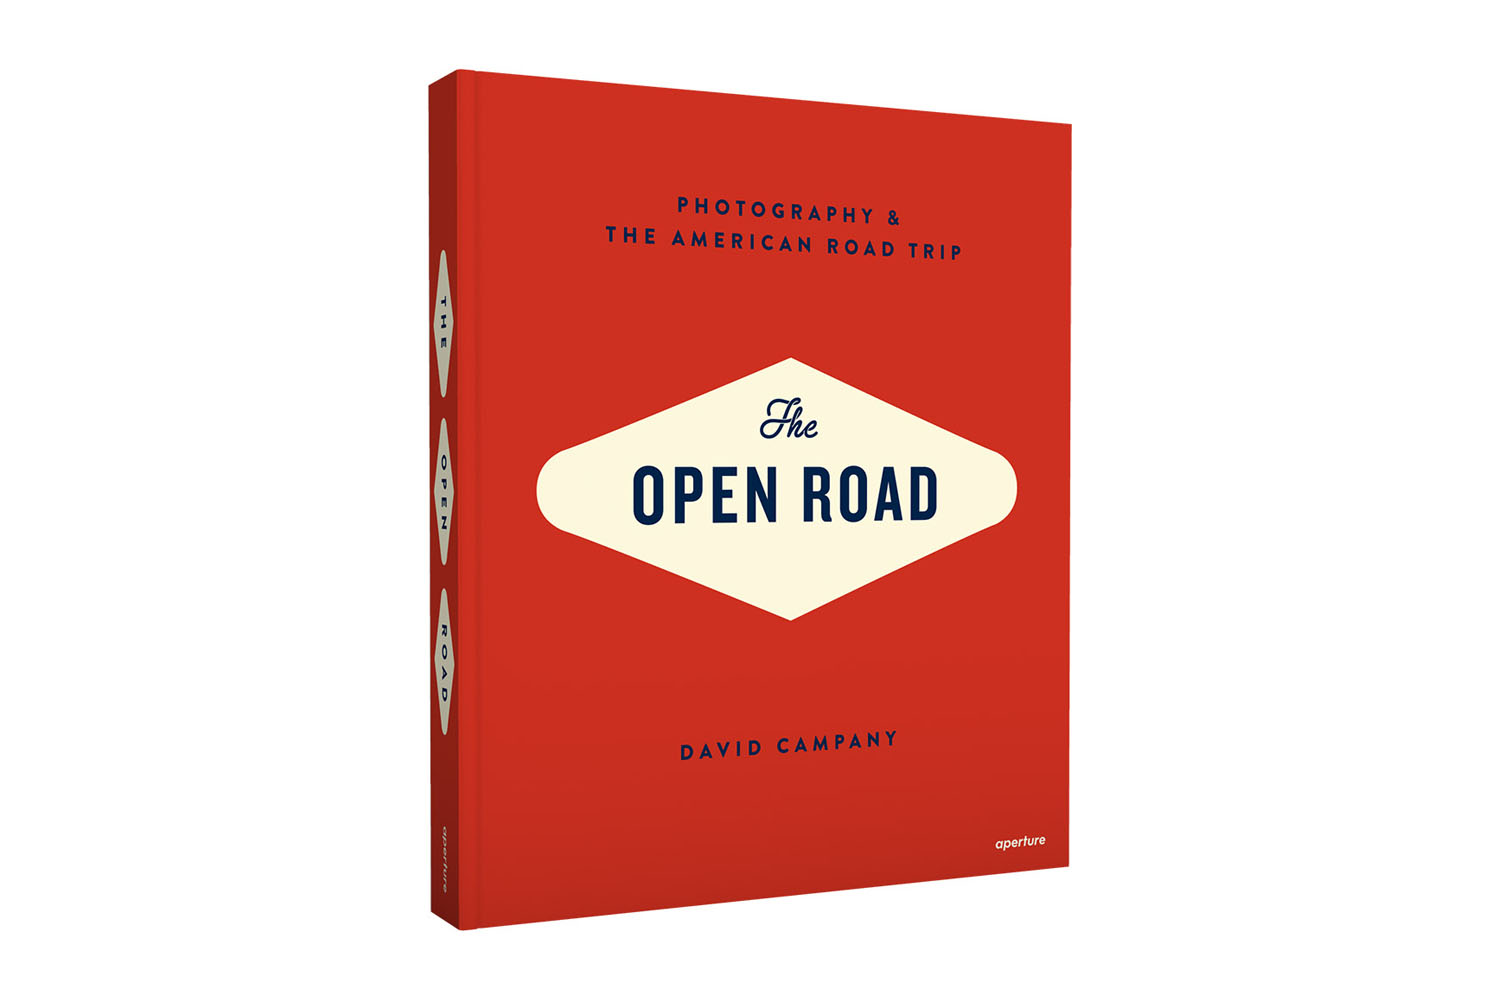 The Open Roadby David Campany, published by ApertureDedicated to the Great American Road Trip, Open Road considers road trip photography as a genre of it's own, and studies bodies of work that approach the expansive American landscape through car windows and camera lenses.